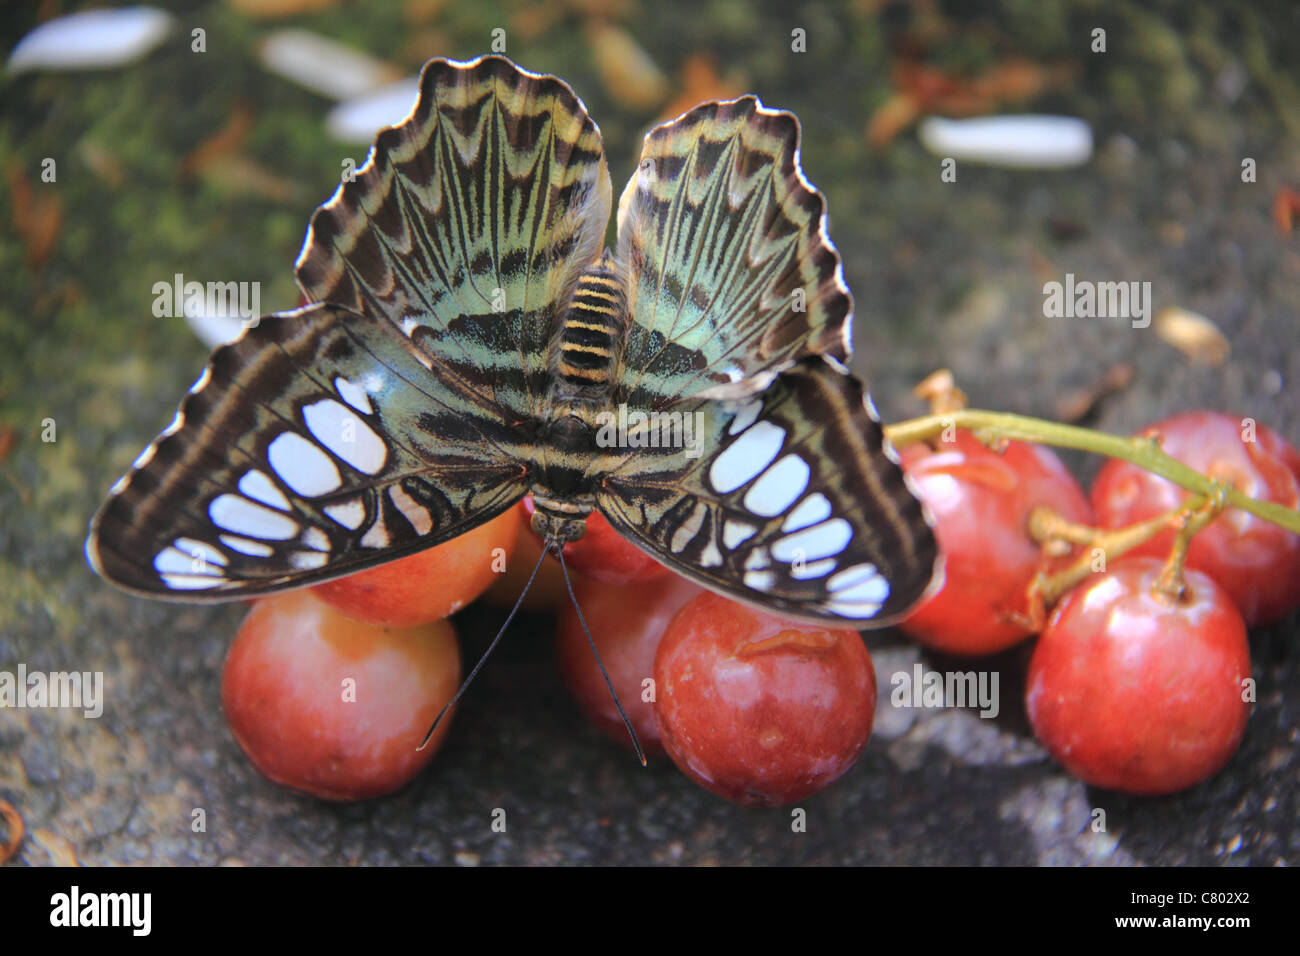 Citrus Swallowtail Butterfly perched on some grapes Stock Photo